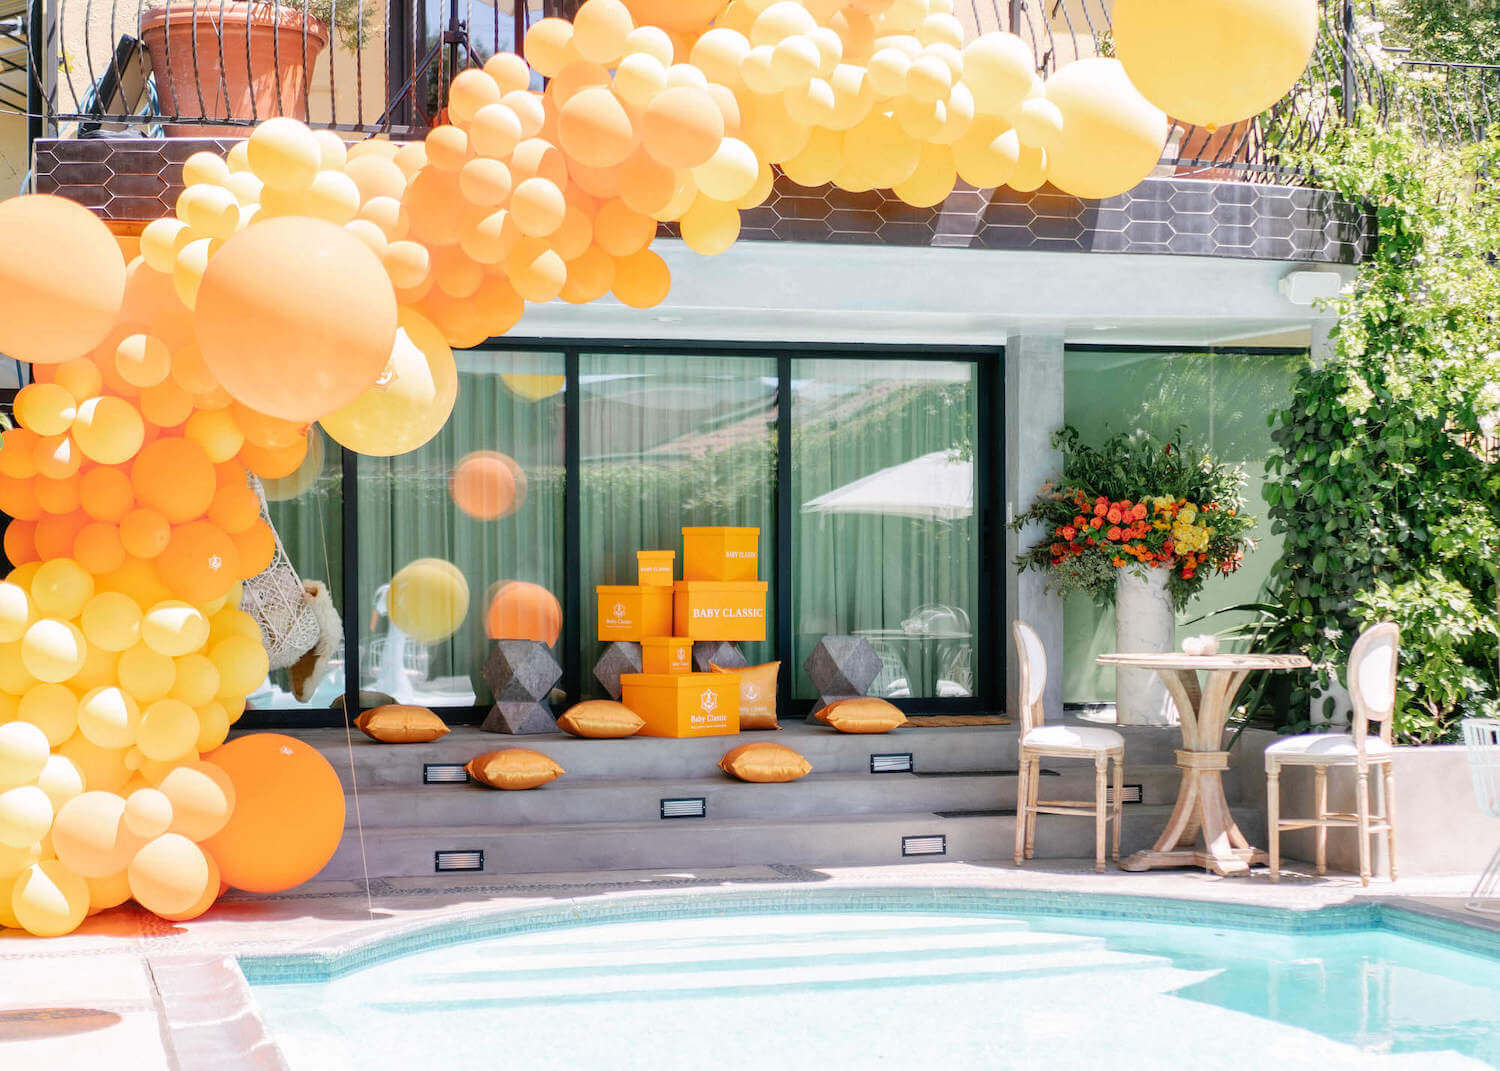 Pool baby shower with balloon garland decor 